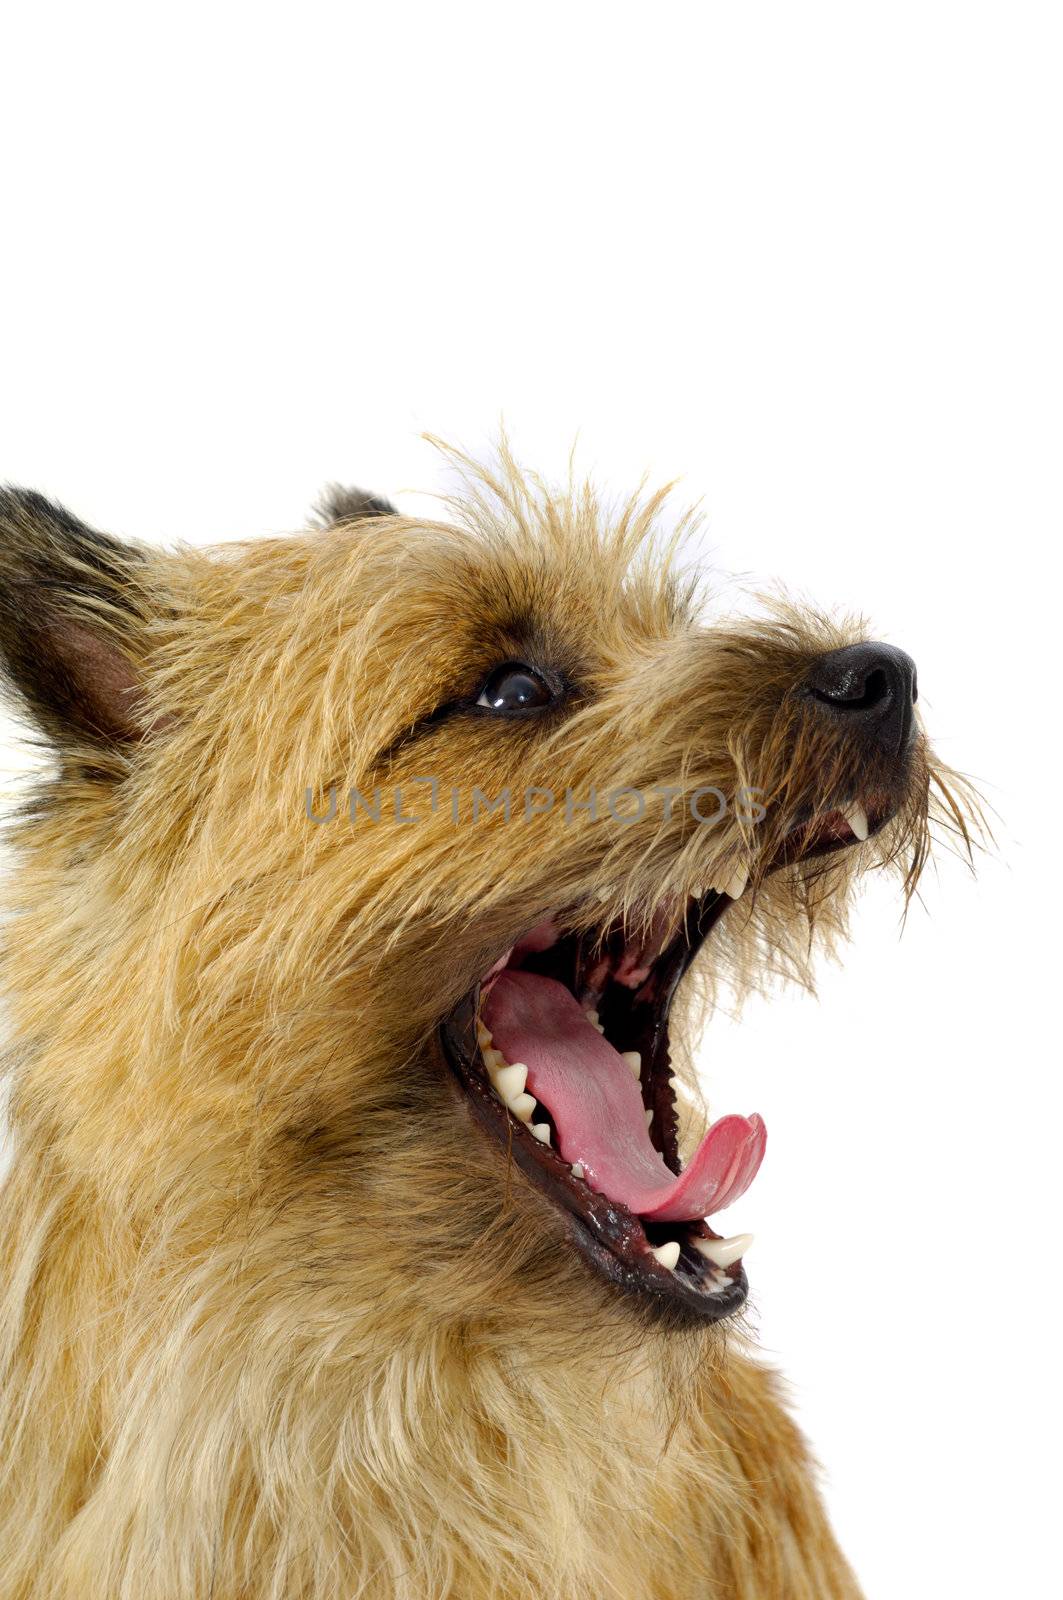 Dog face with open mouth by cfoto